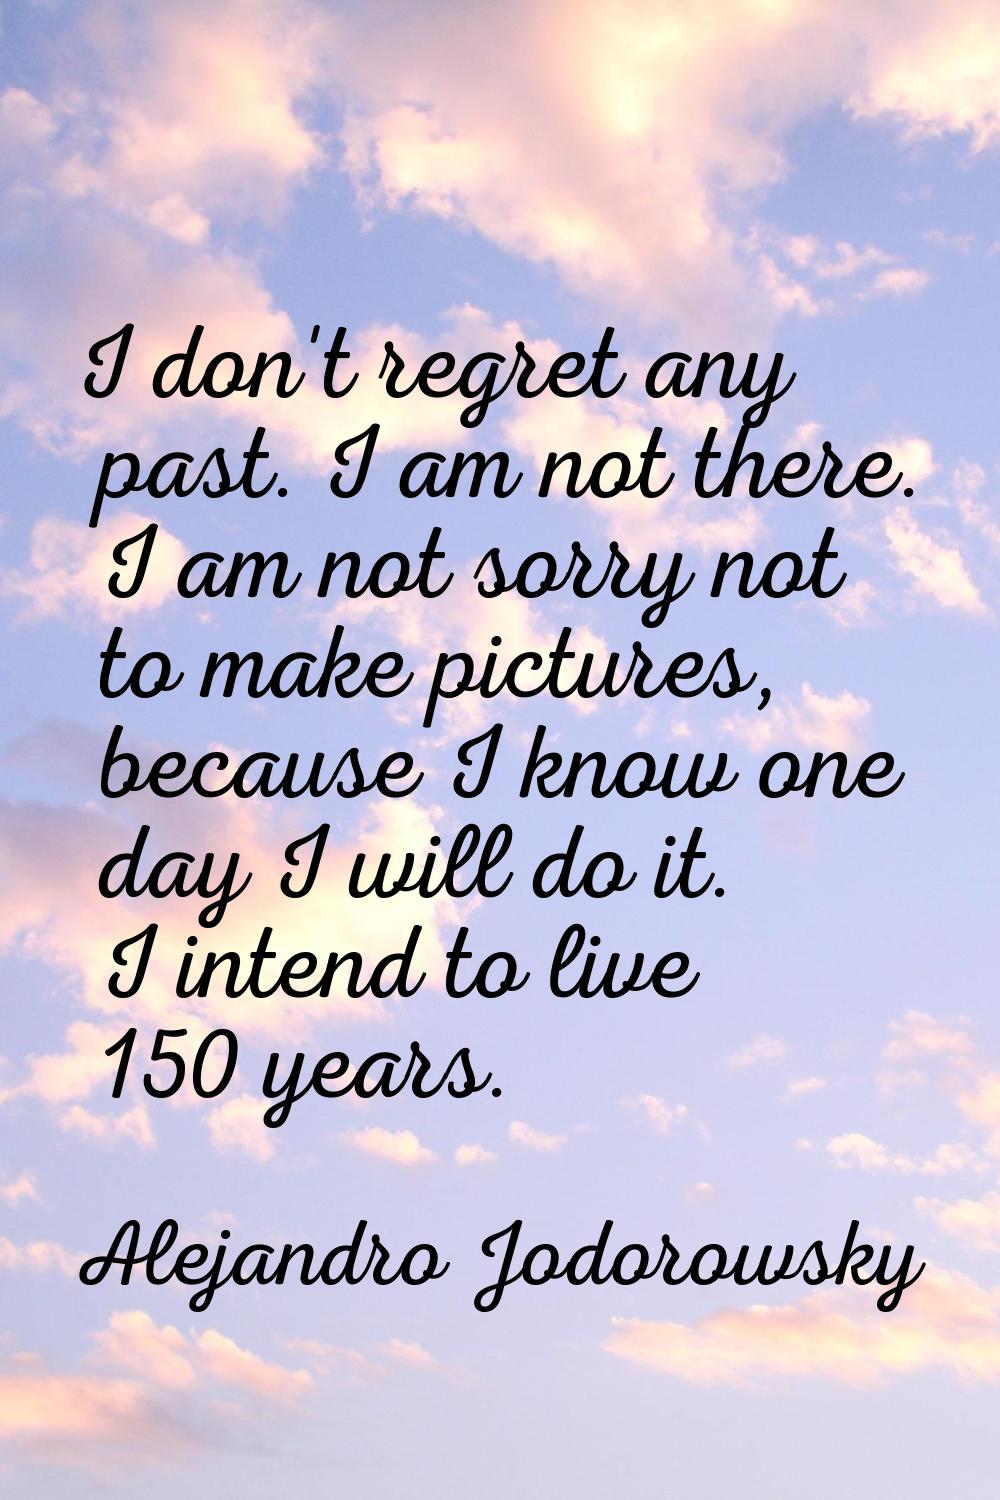 I don't regret any past. I am not there. I am not sorry not to make pictures, because I know one da